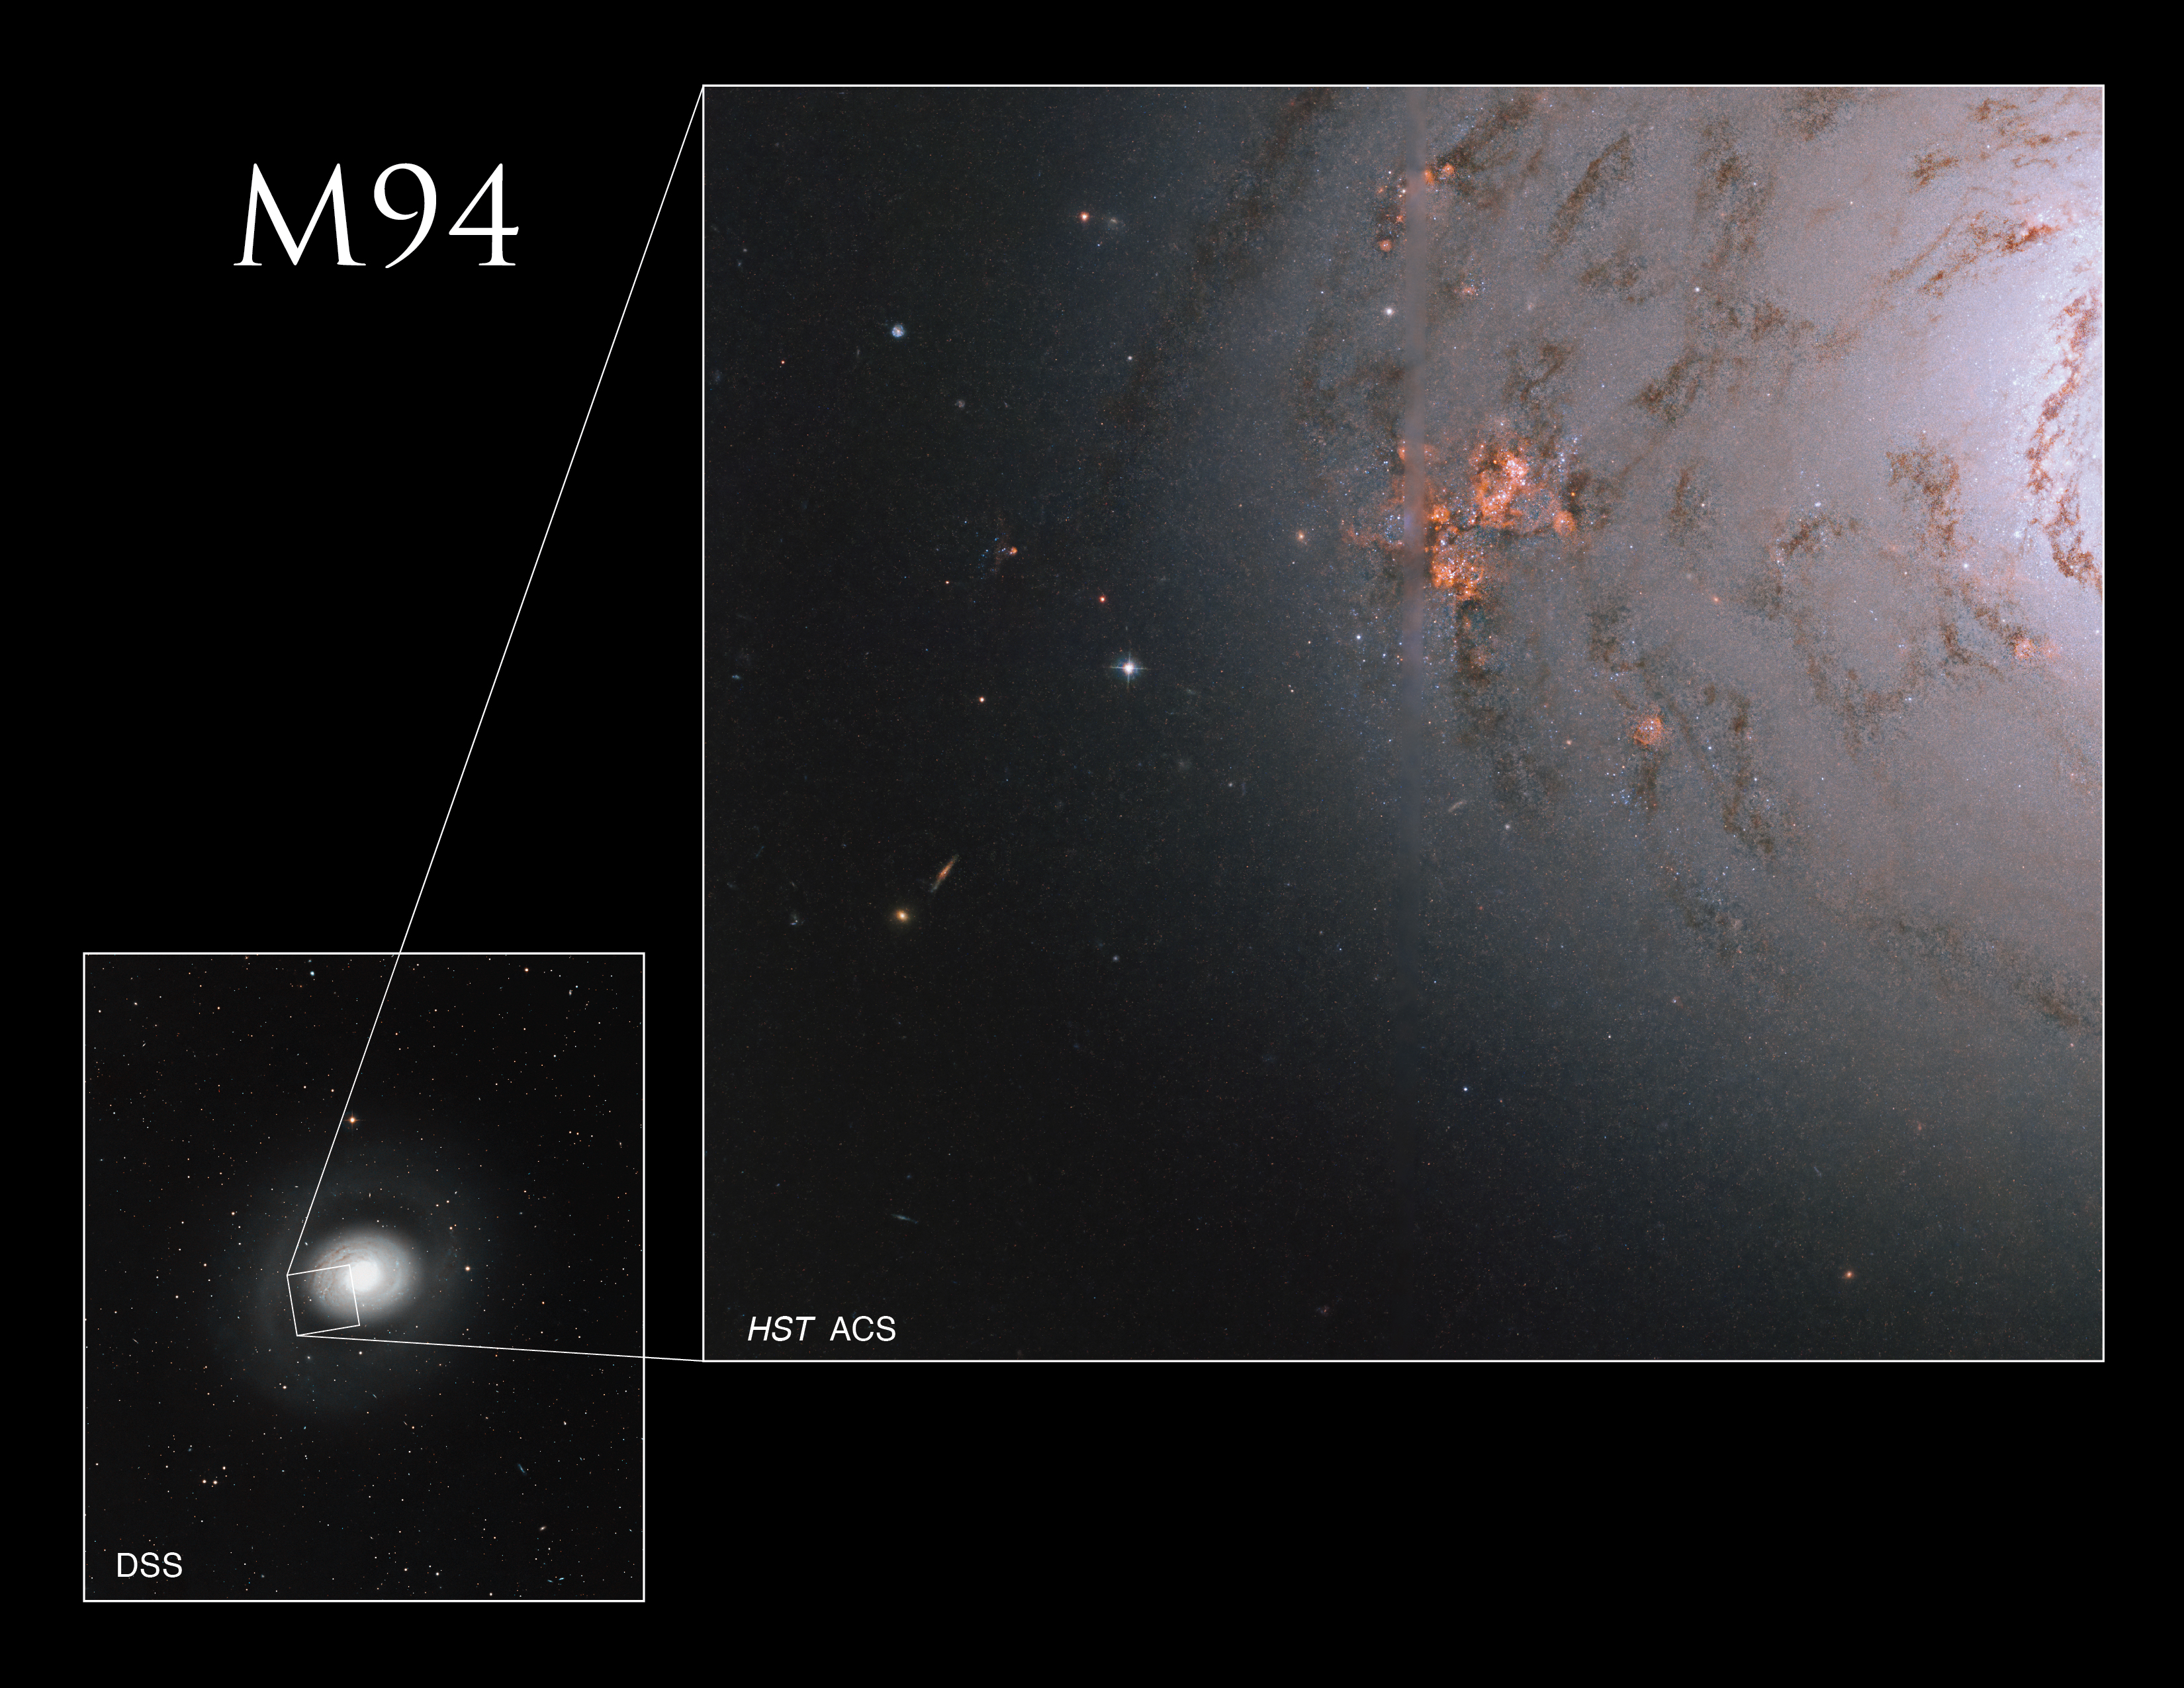 Left, Digitized Sky Survey Image: A small, black and white image of a galaxy seen face on. The galaxy has a bright-white center with wide concentric rings that dim as you move outward from the galaxy's core. Right, Hubble image: Near the right side of the image, a pale pink galactic core shines with spiraling arms of dark dust extending out to the center of the image. Dark sky interspersed with distant galaxies and stars fills the left side of the image. A bright patch of reddish stars is near the center. A vertical blurred line down the image’s center represents a region where no Hubble data was taken.